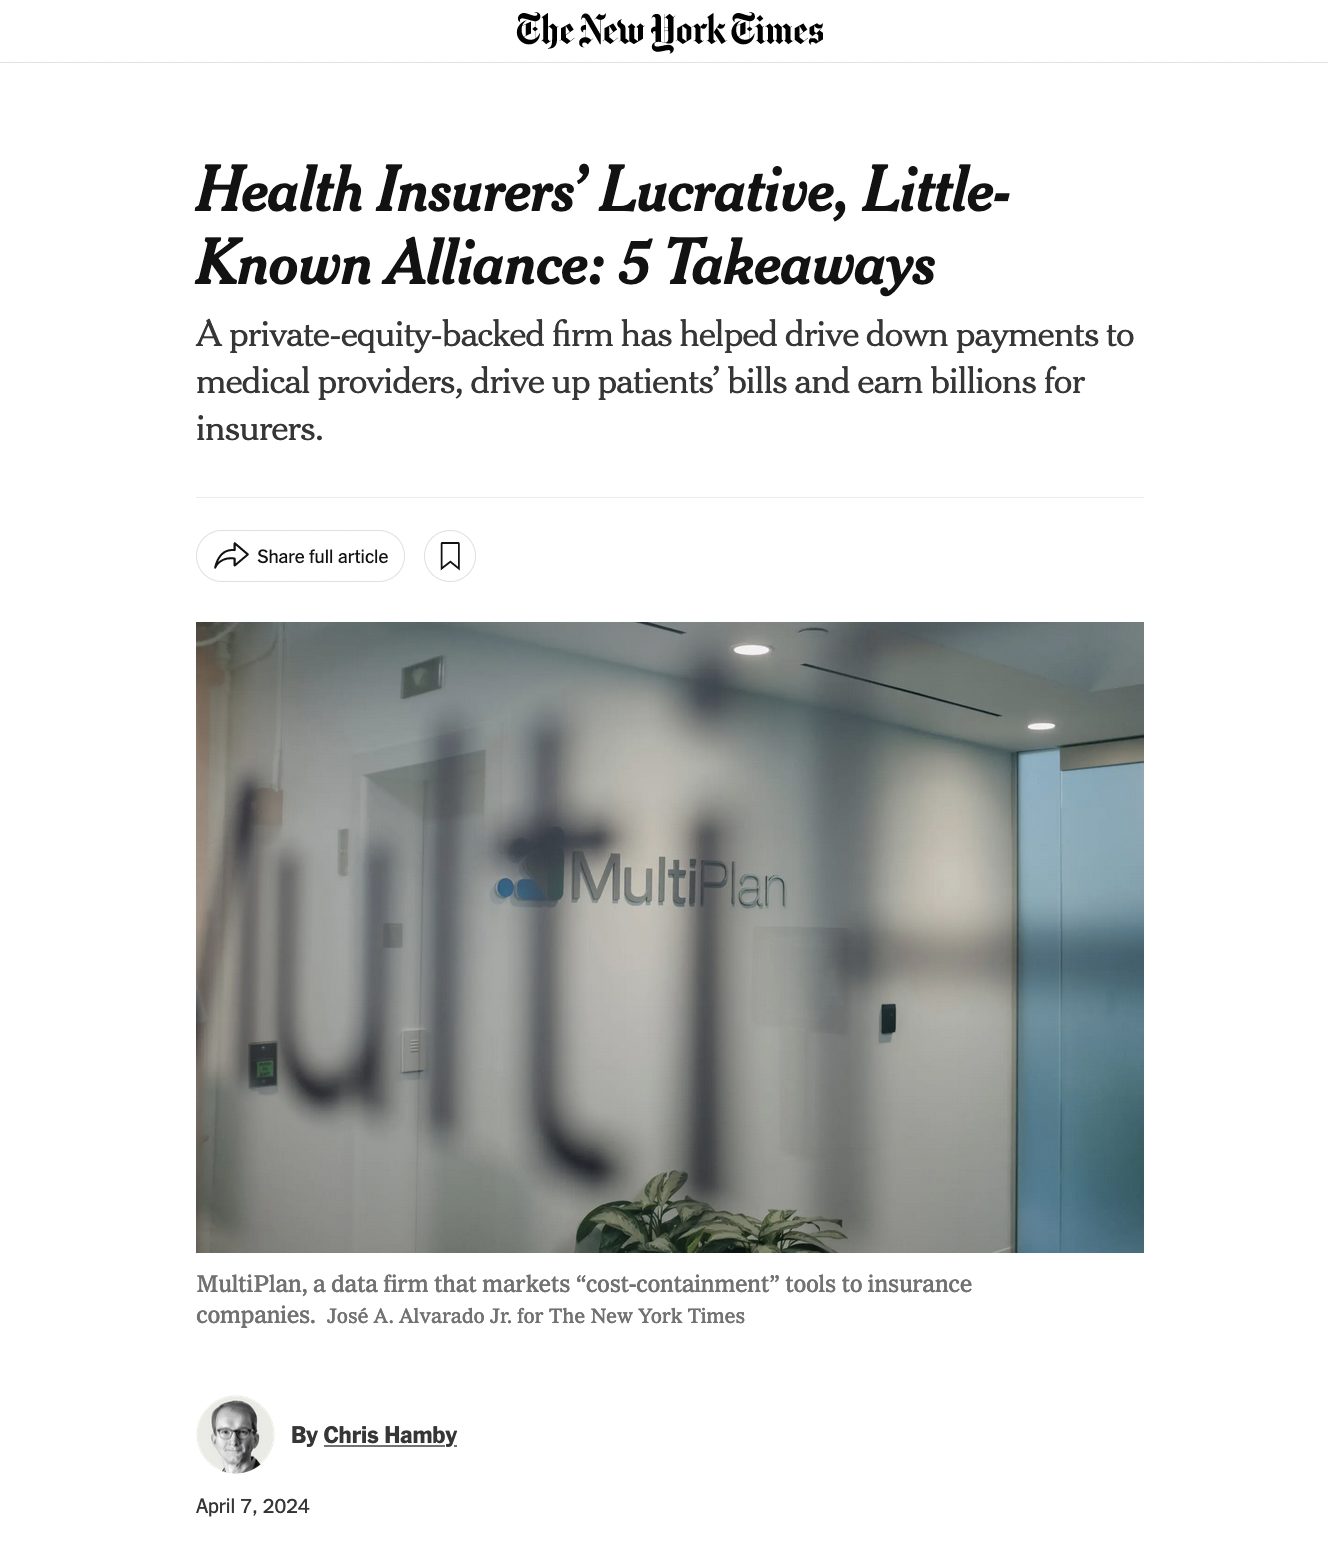 for The New York Times: Health Insurers’ Lucrative, Little-Known Alliance: 5 Takeaways